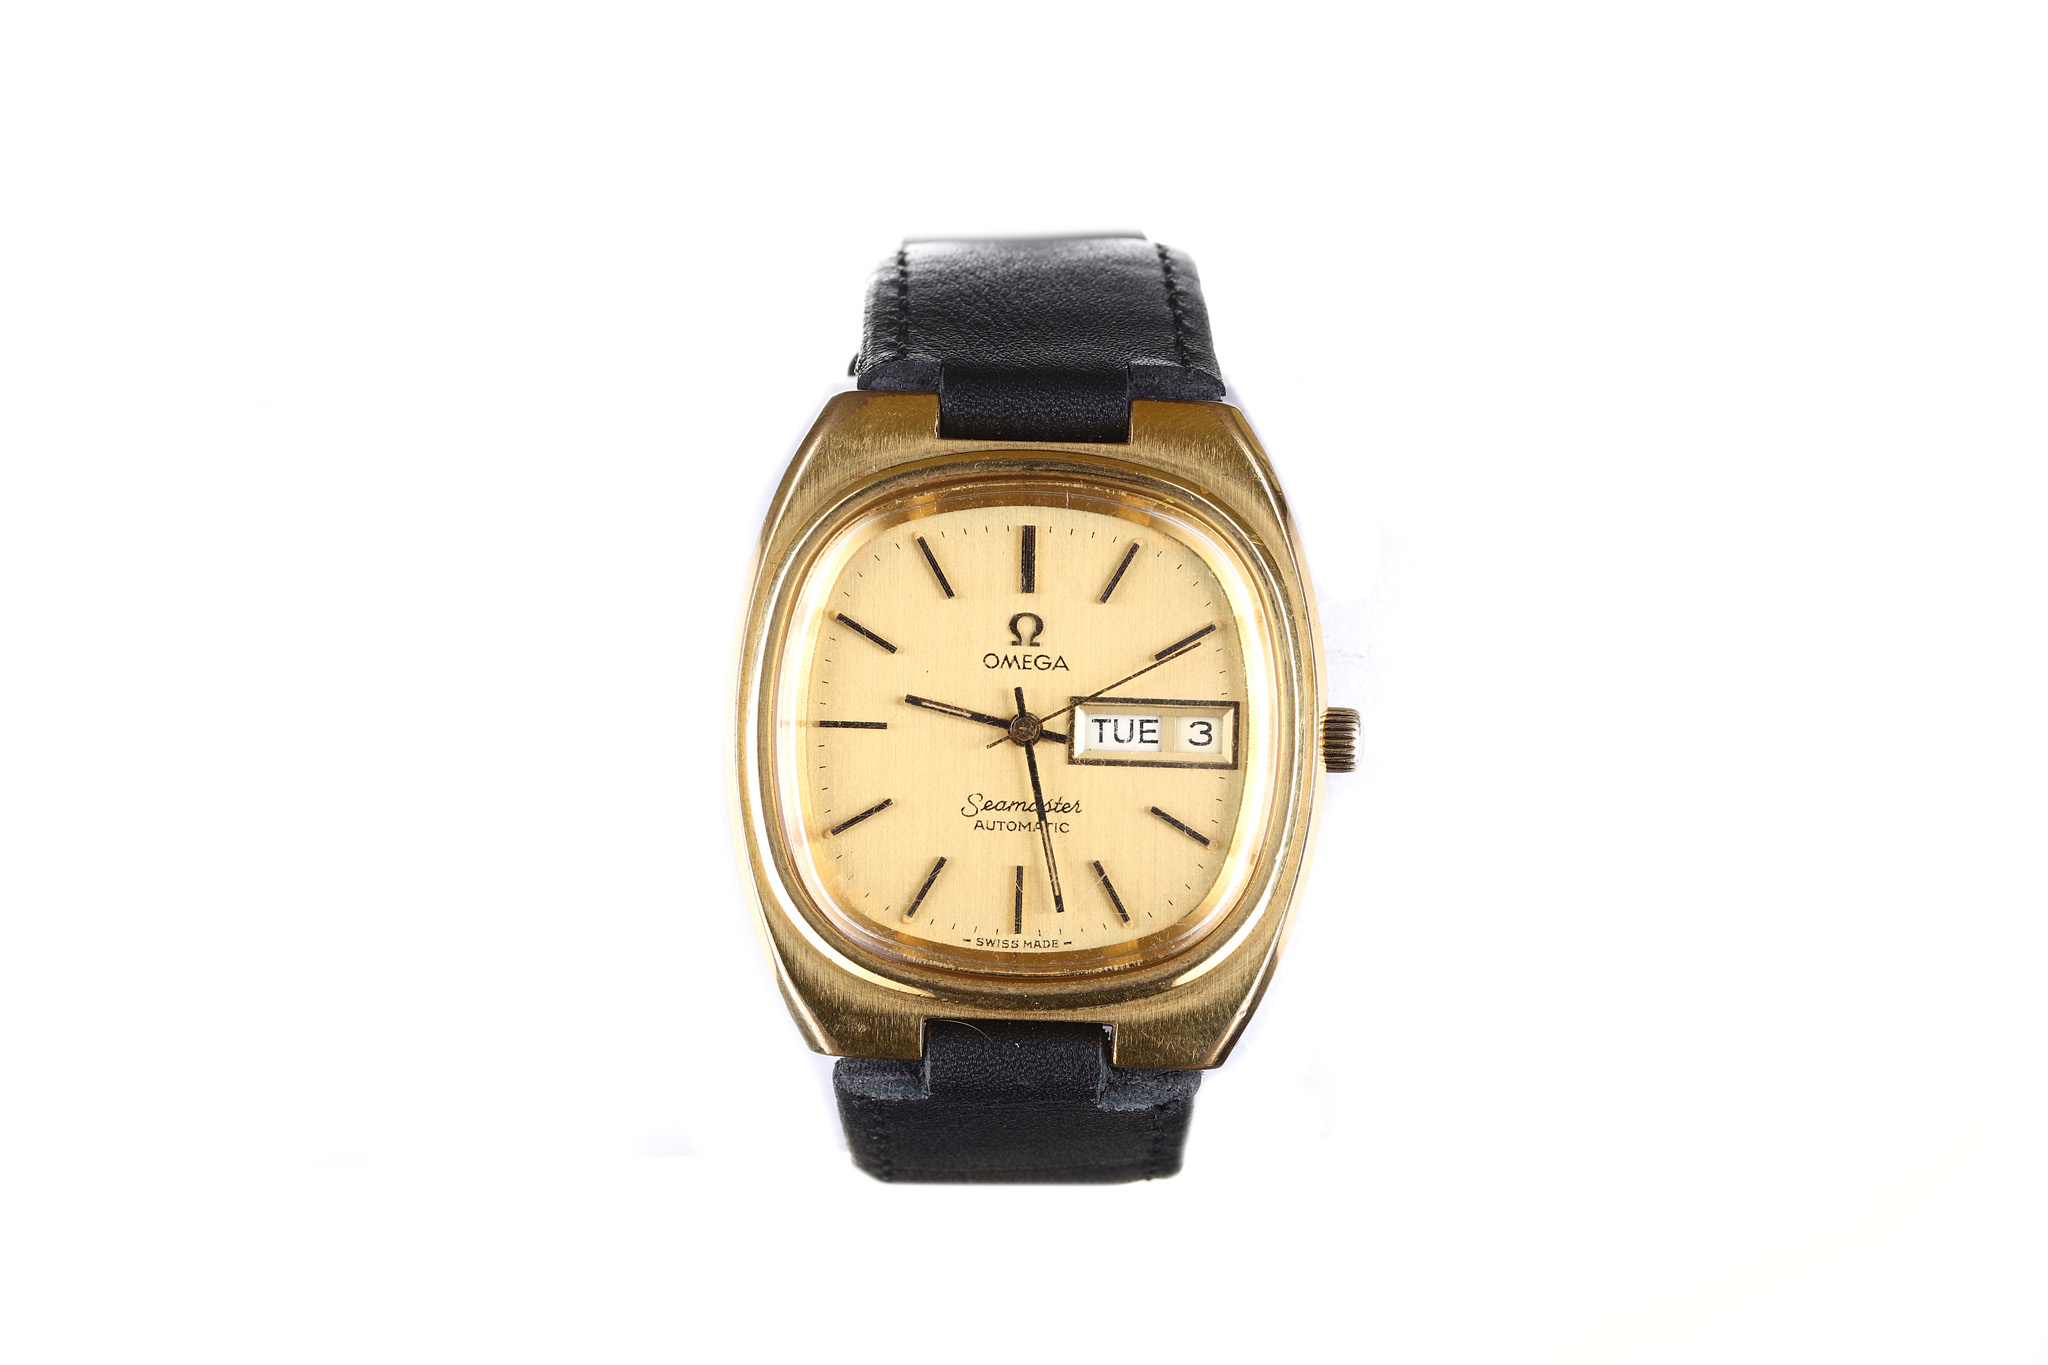 Omega. A gold capped automatic calendar wristwatch. Model: Seamaster. Reference: 166.0213 / 366.